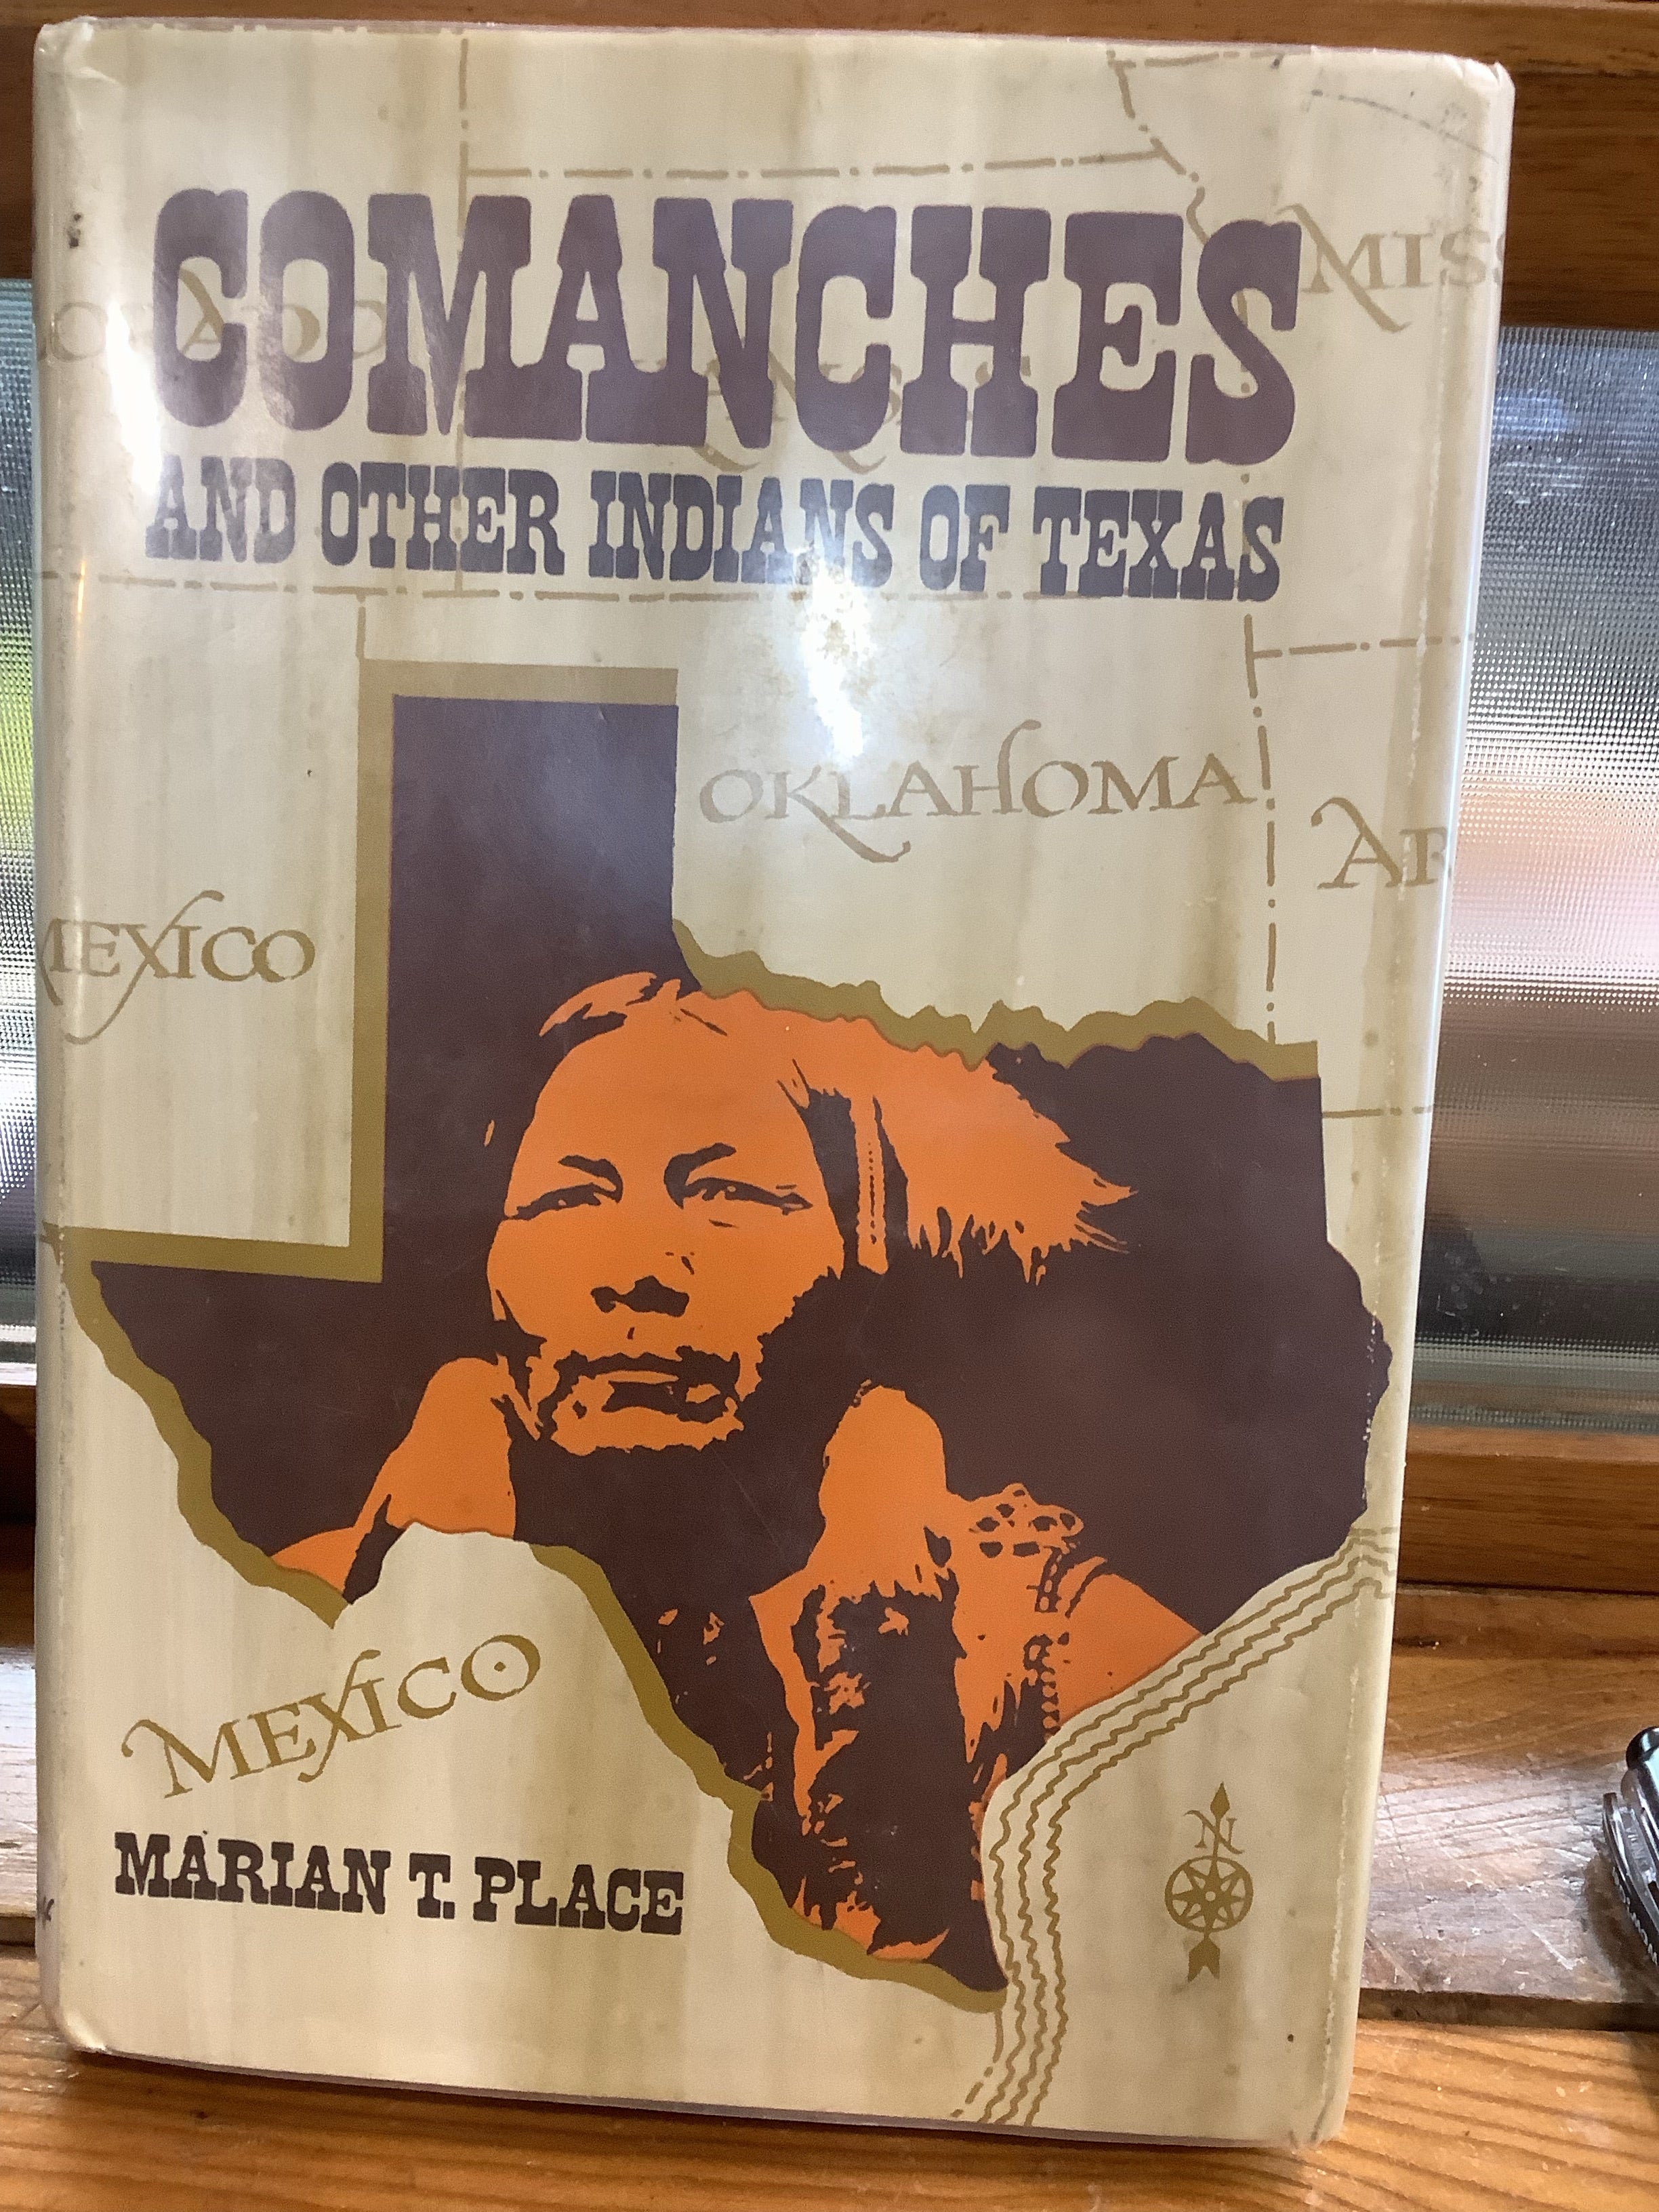 BOOKS - Comanches and other Indians of Texas